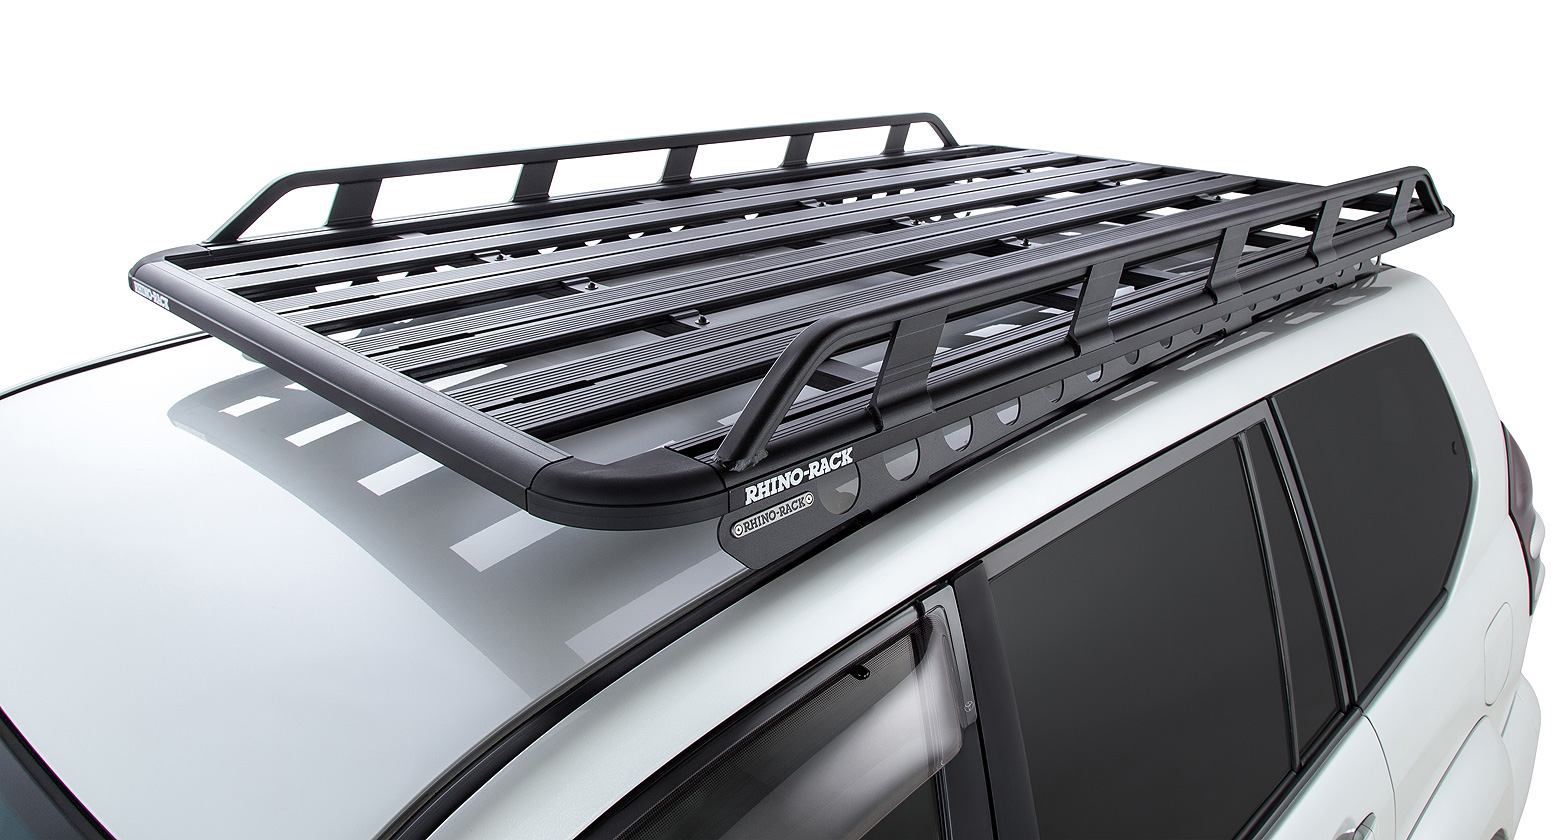 Rhino Rack JB0004 Pioneer Tradie (2128mm x 1236mm) for Toyota Land Cruiser Prado 5dr 120 Series with Bare Roof (2002 to 2009) - Factory Point Mount